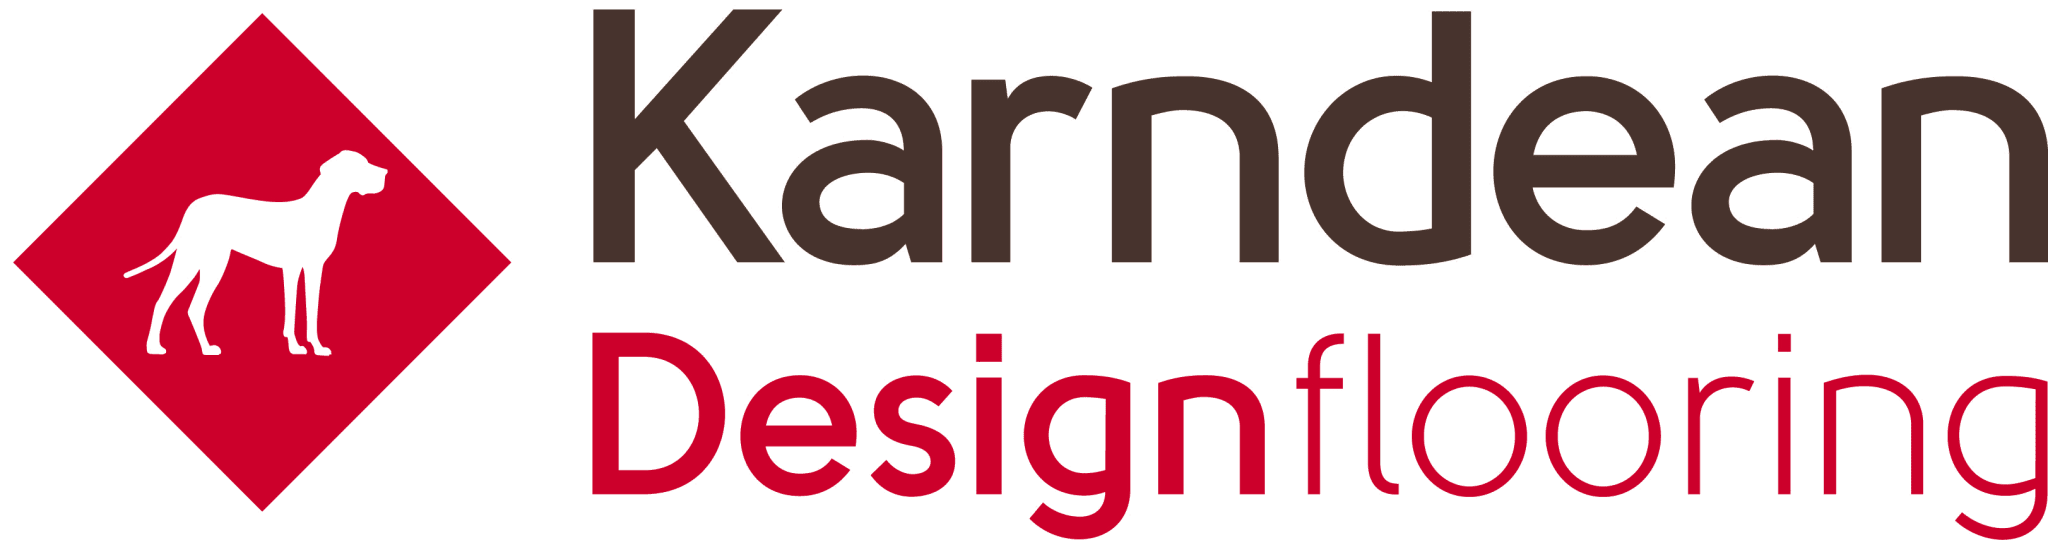 The logo of Karndean Design Flooring, available at Cavendish Kitchens